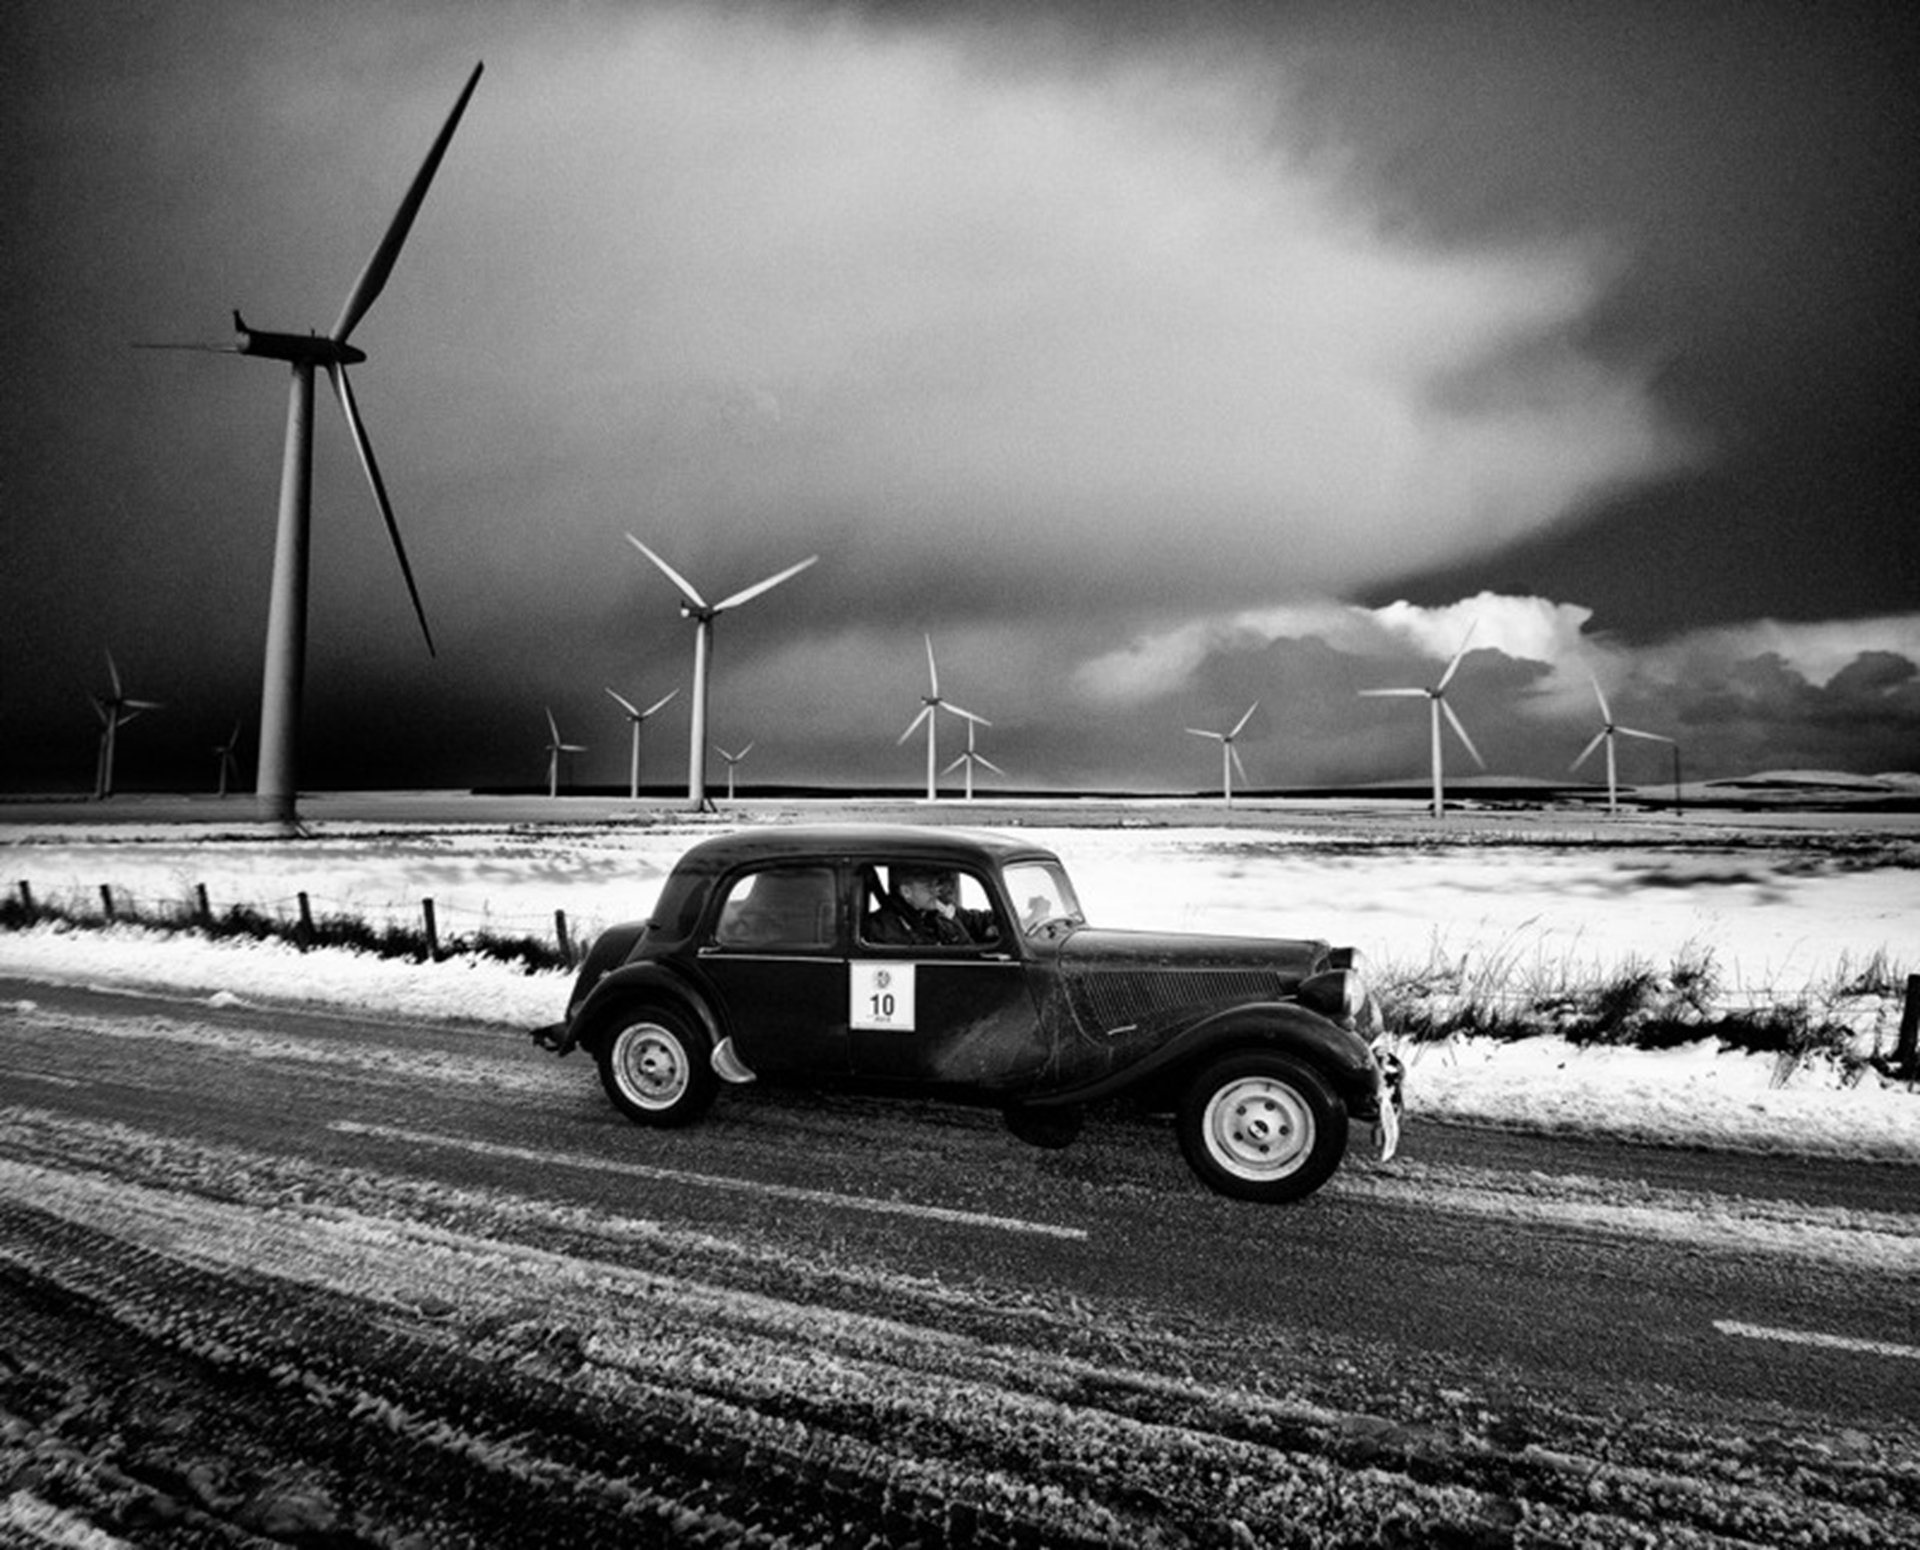 CLASSIC RALLY CARS FROM ALL OVER EUROPE CONVERGE ON LANDS END FOR EPIC WINTER BATTLE TO JOHN O’GROATS